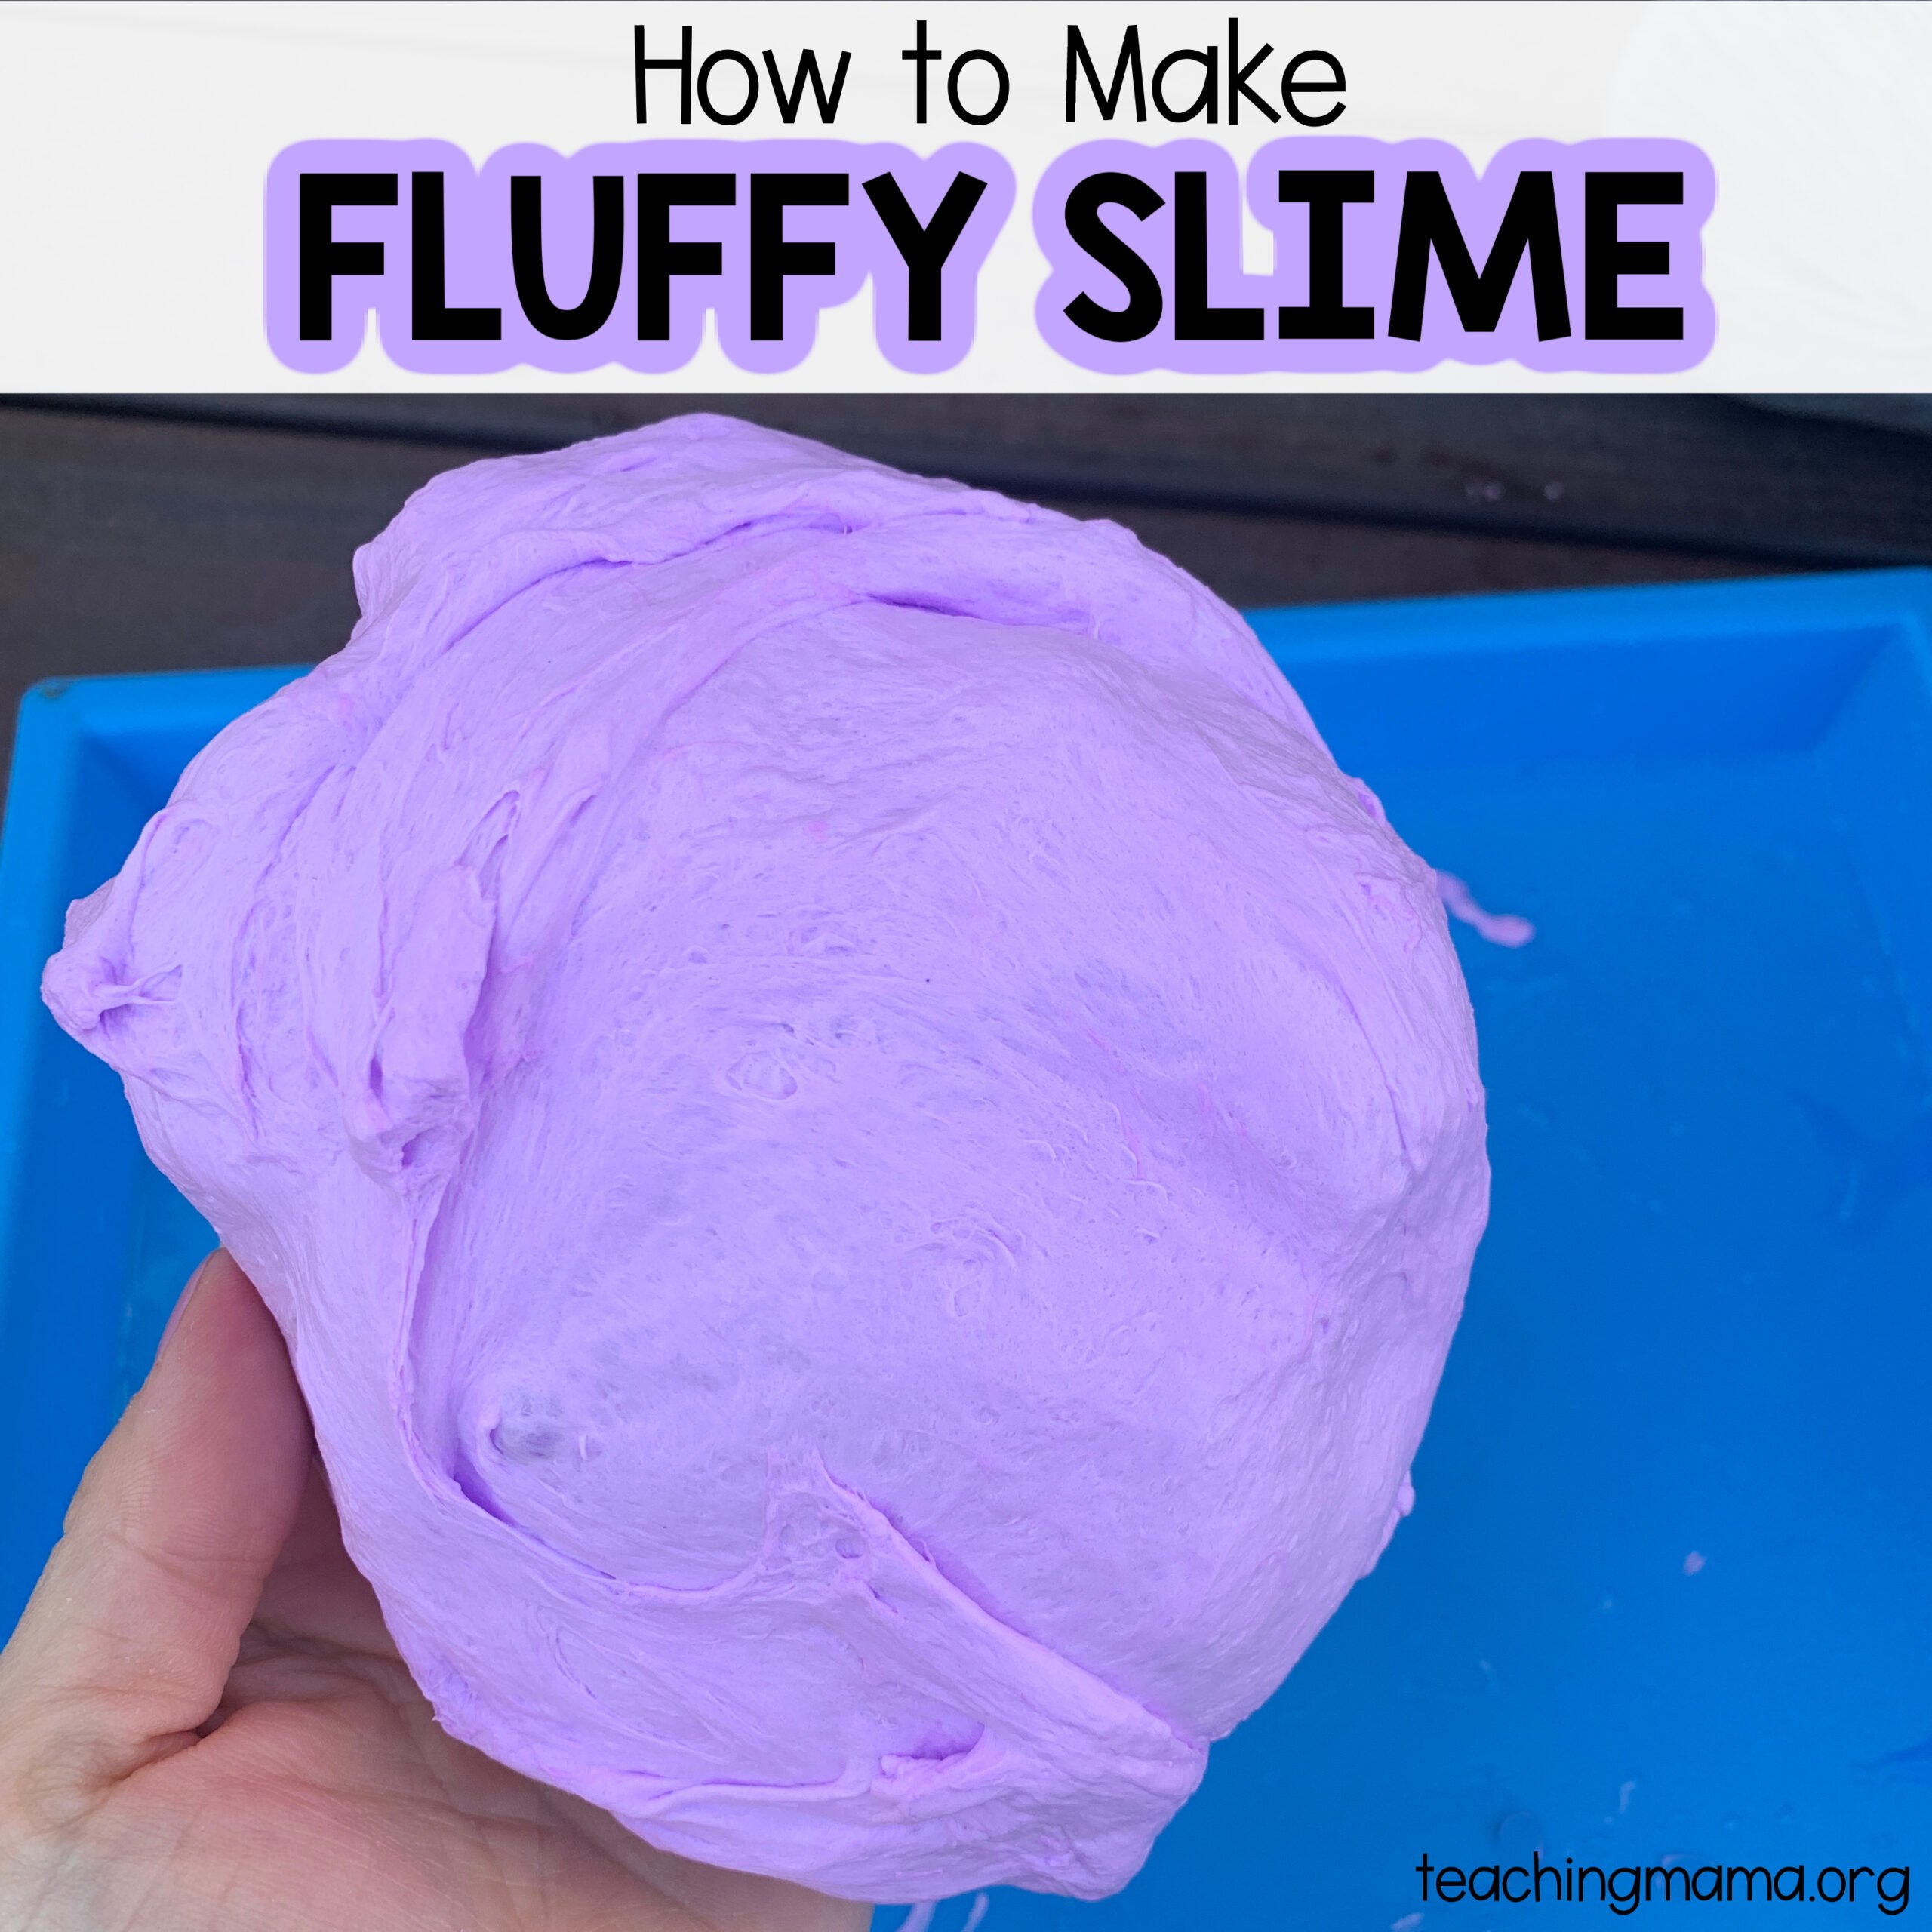 How to Make Fluffy Slime: Easy 3 Ingredient Recipe